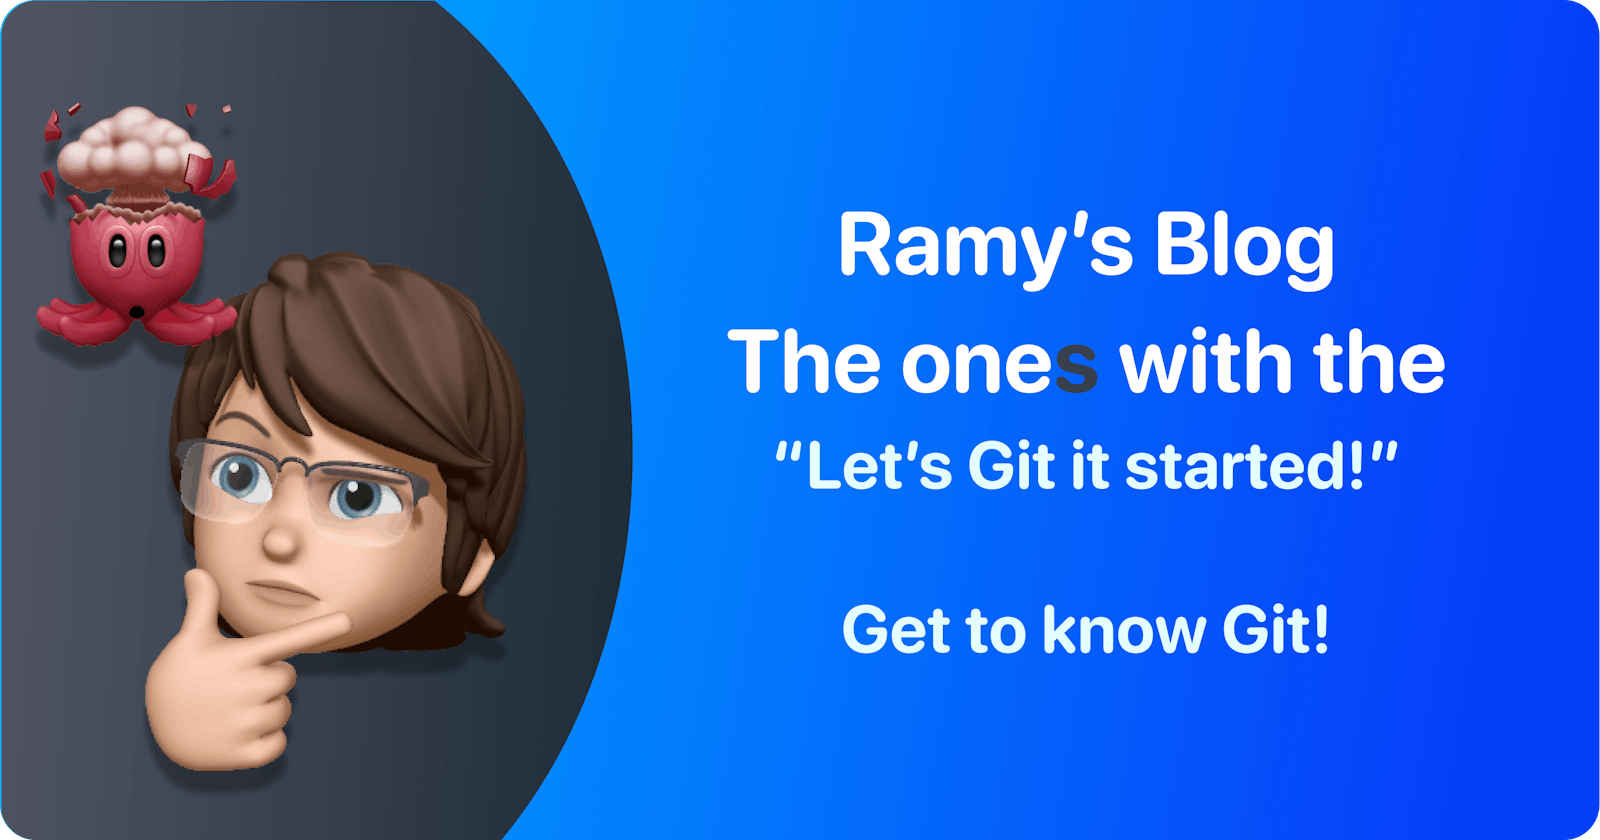 Get to know Git